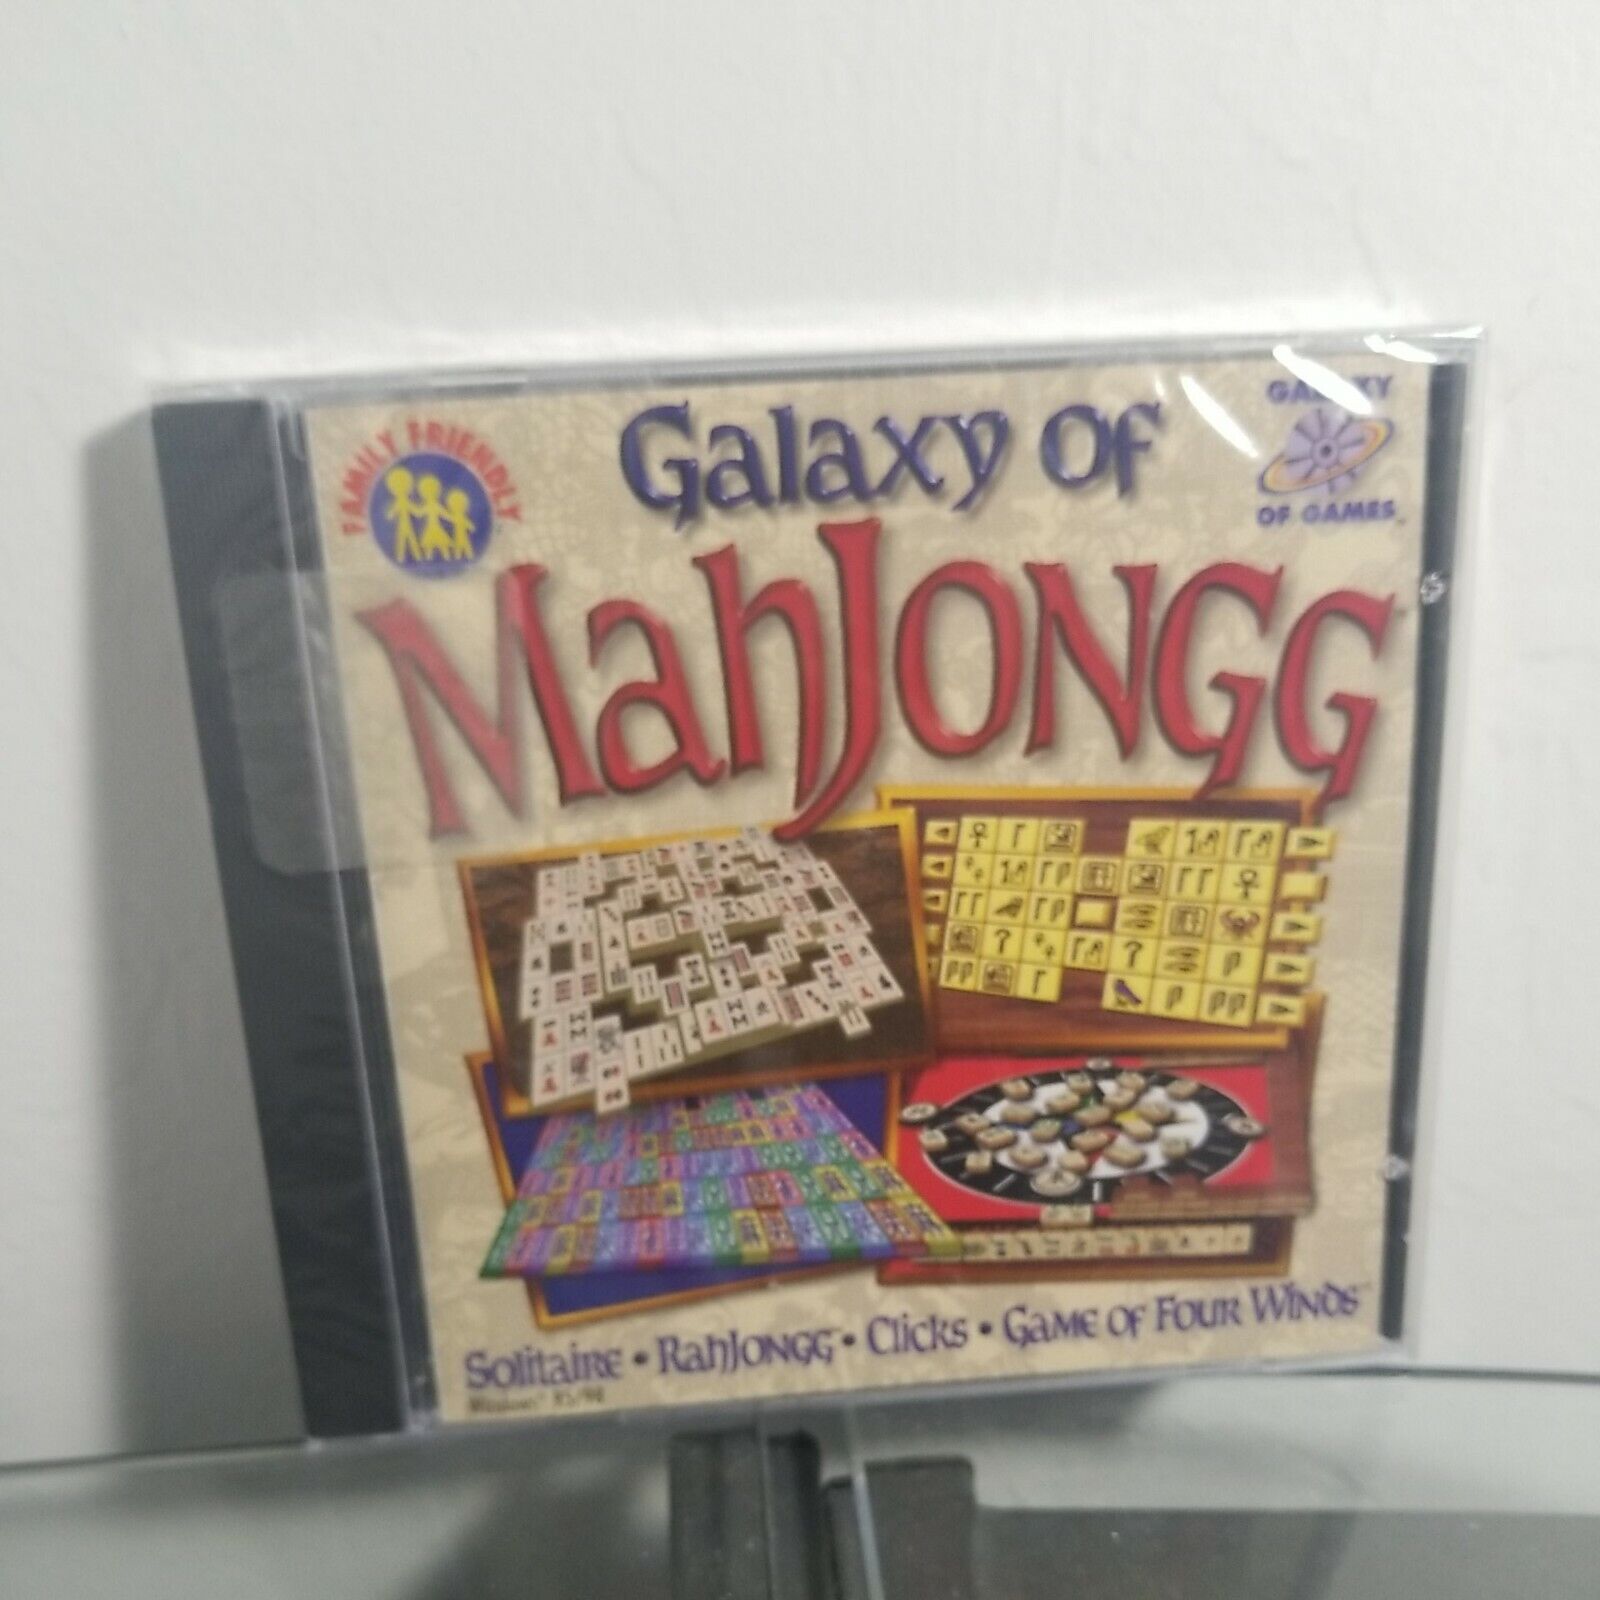 Galaxy of Mahjongg The Ultimate Mahjongg Collection PC Game Win 95 / 98 Sealed 